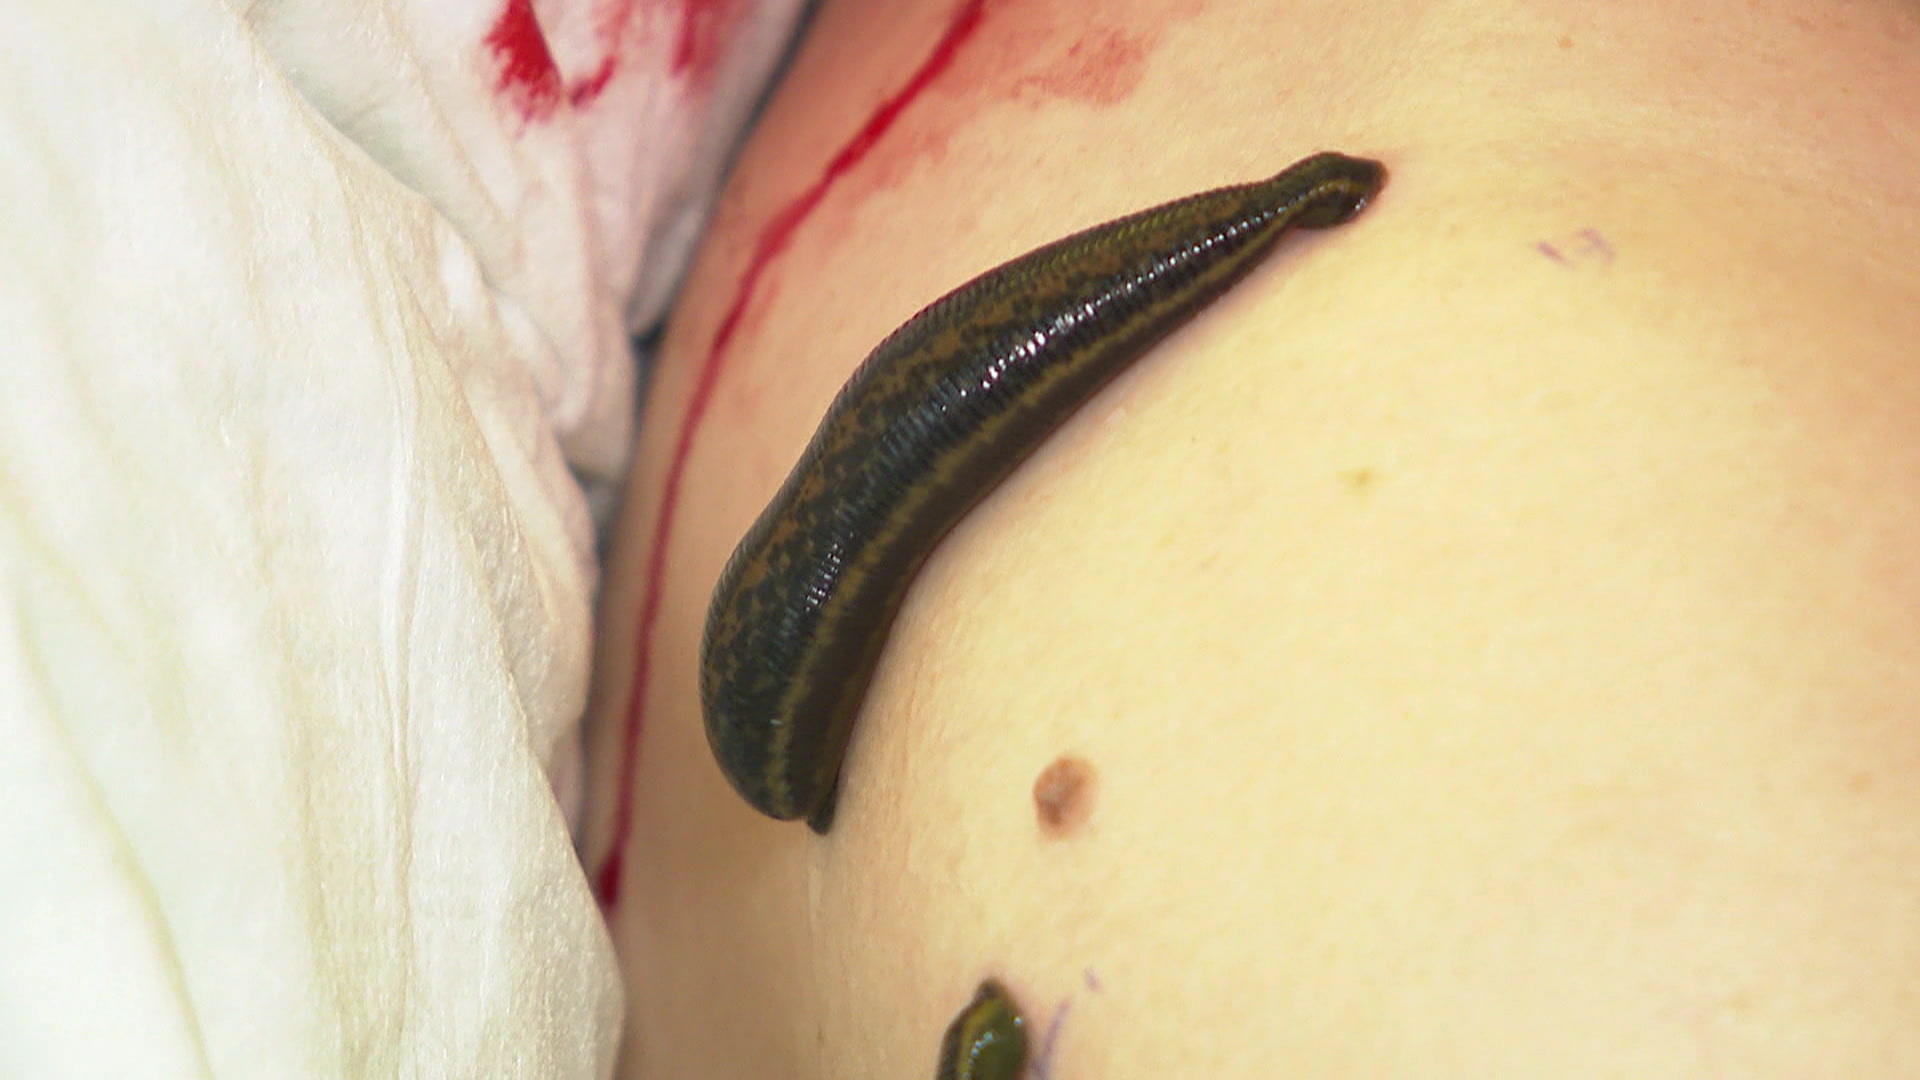 How vampires can help pain patients with leech therapy